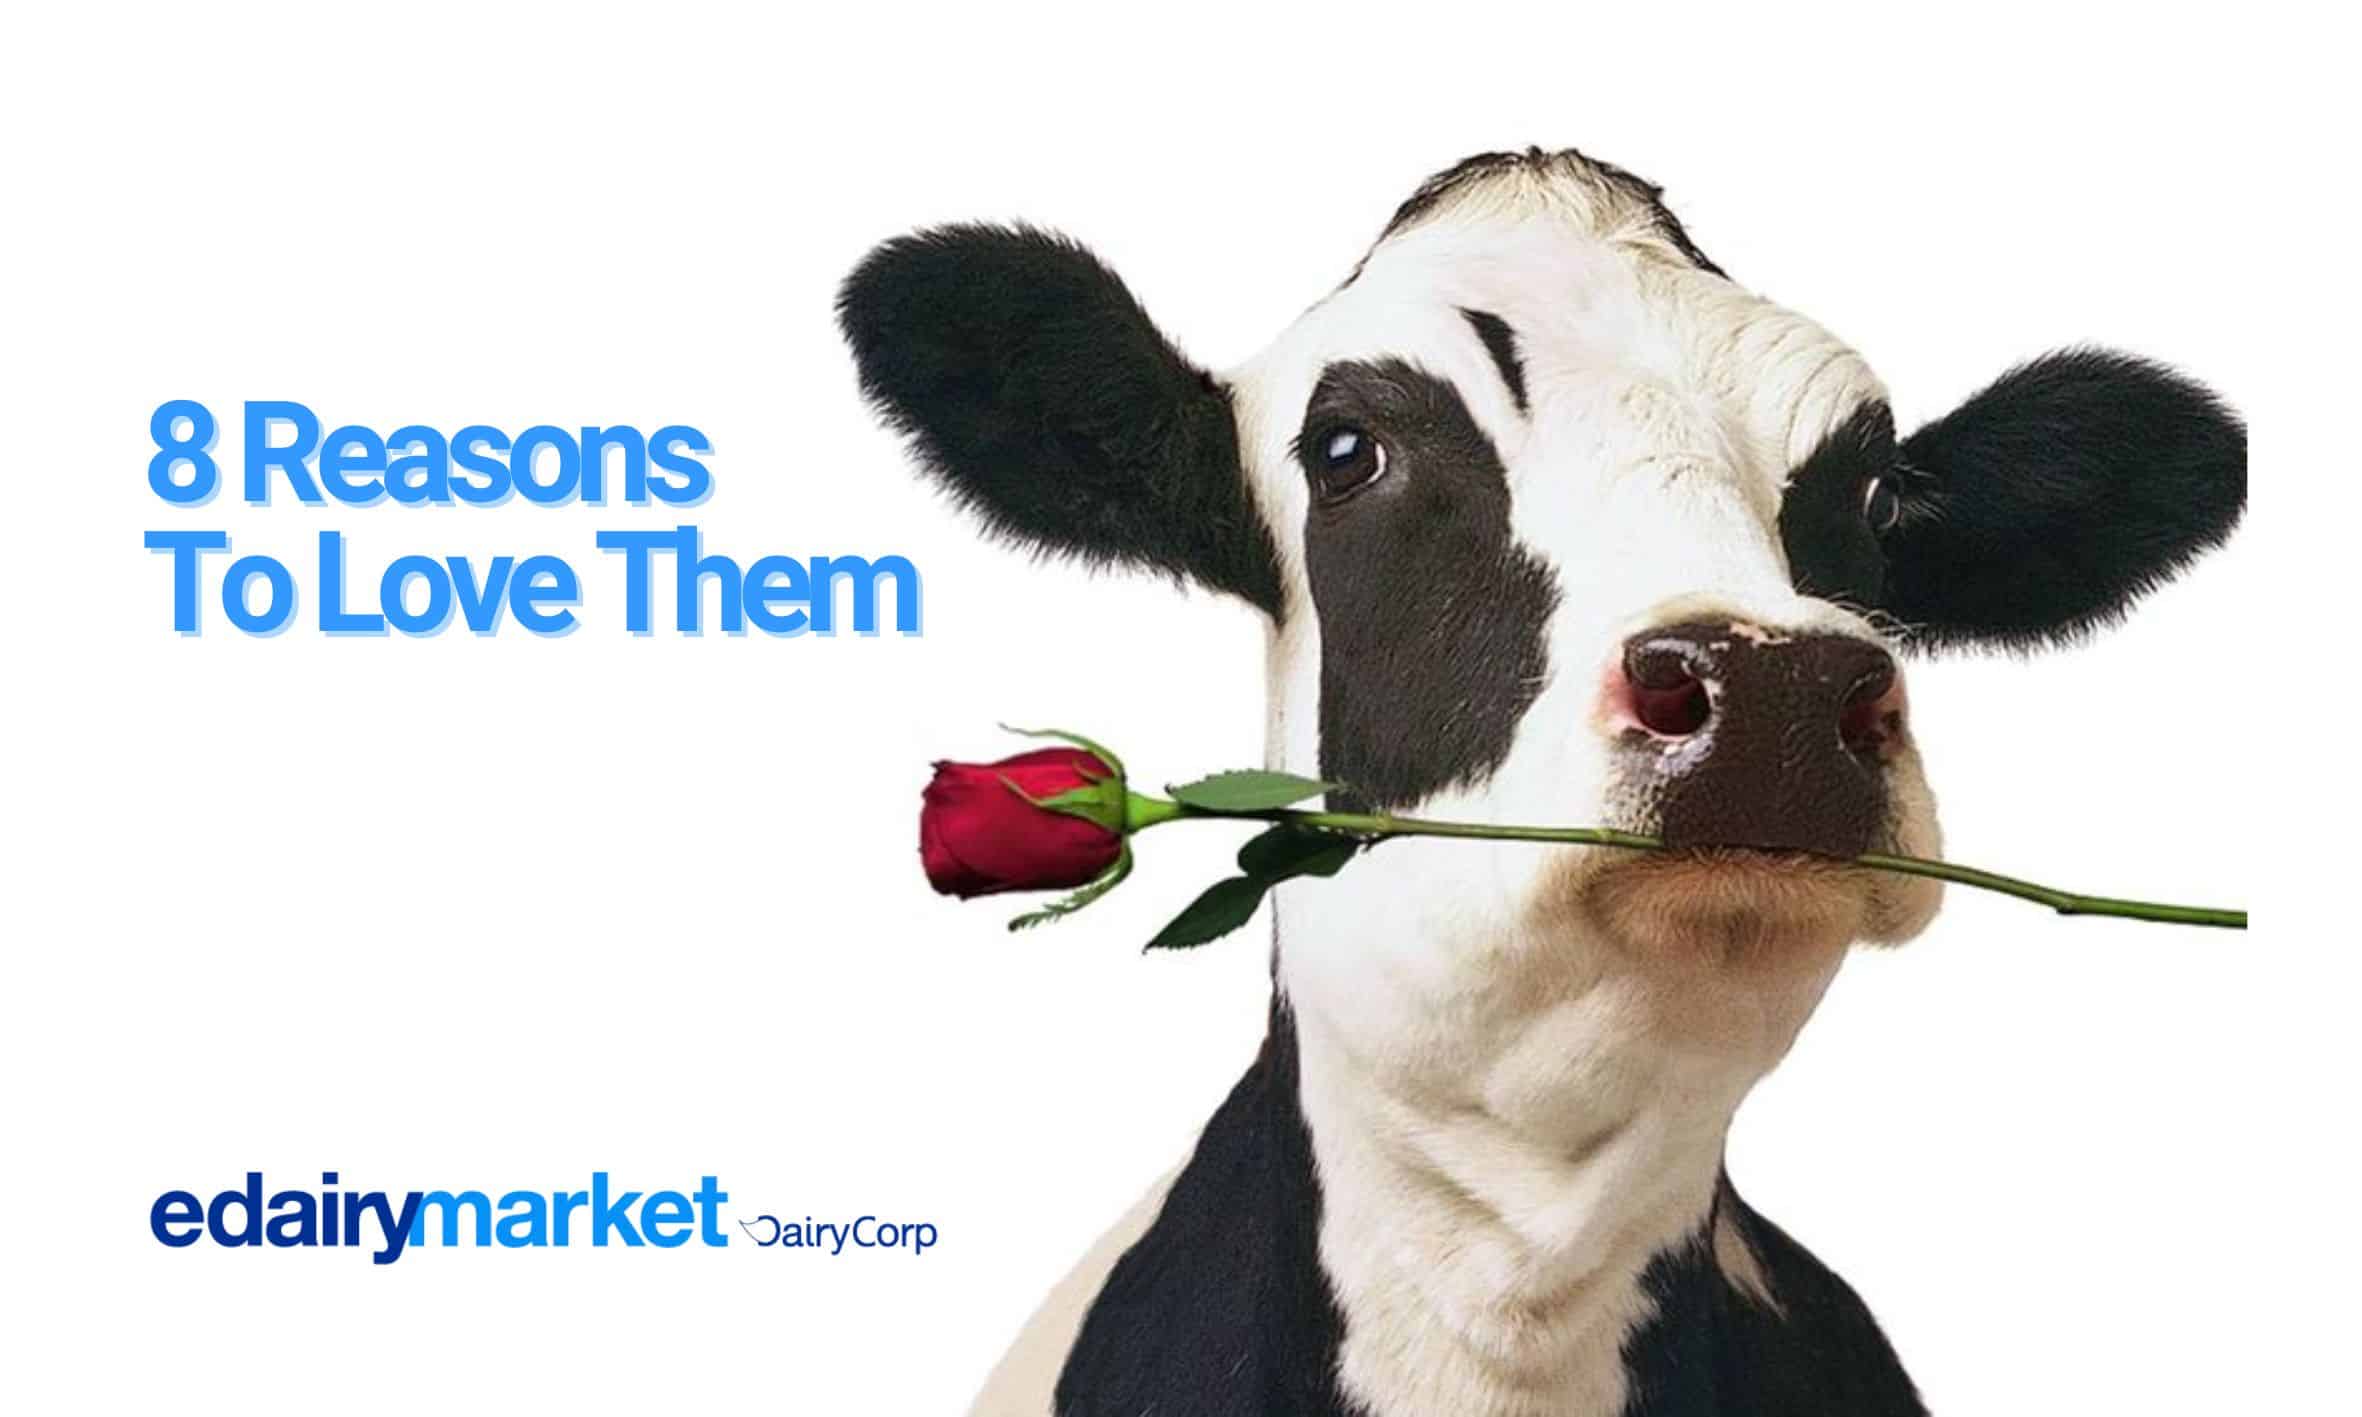 8 Reasons to Love Dairy Cows